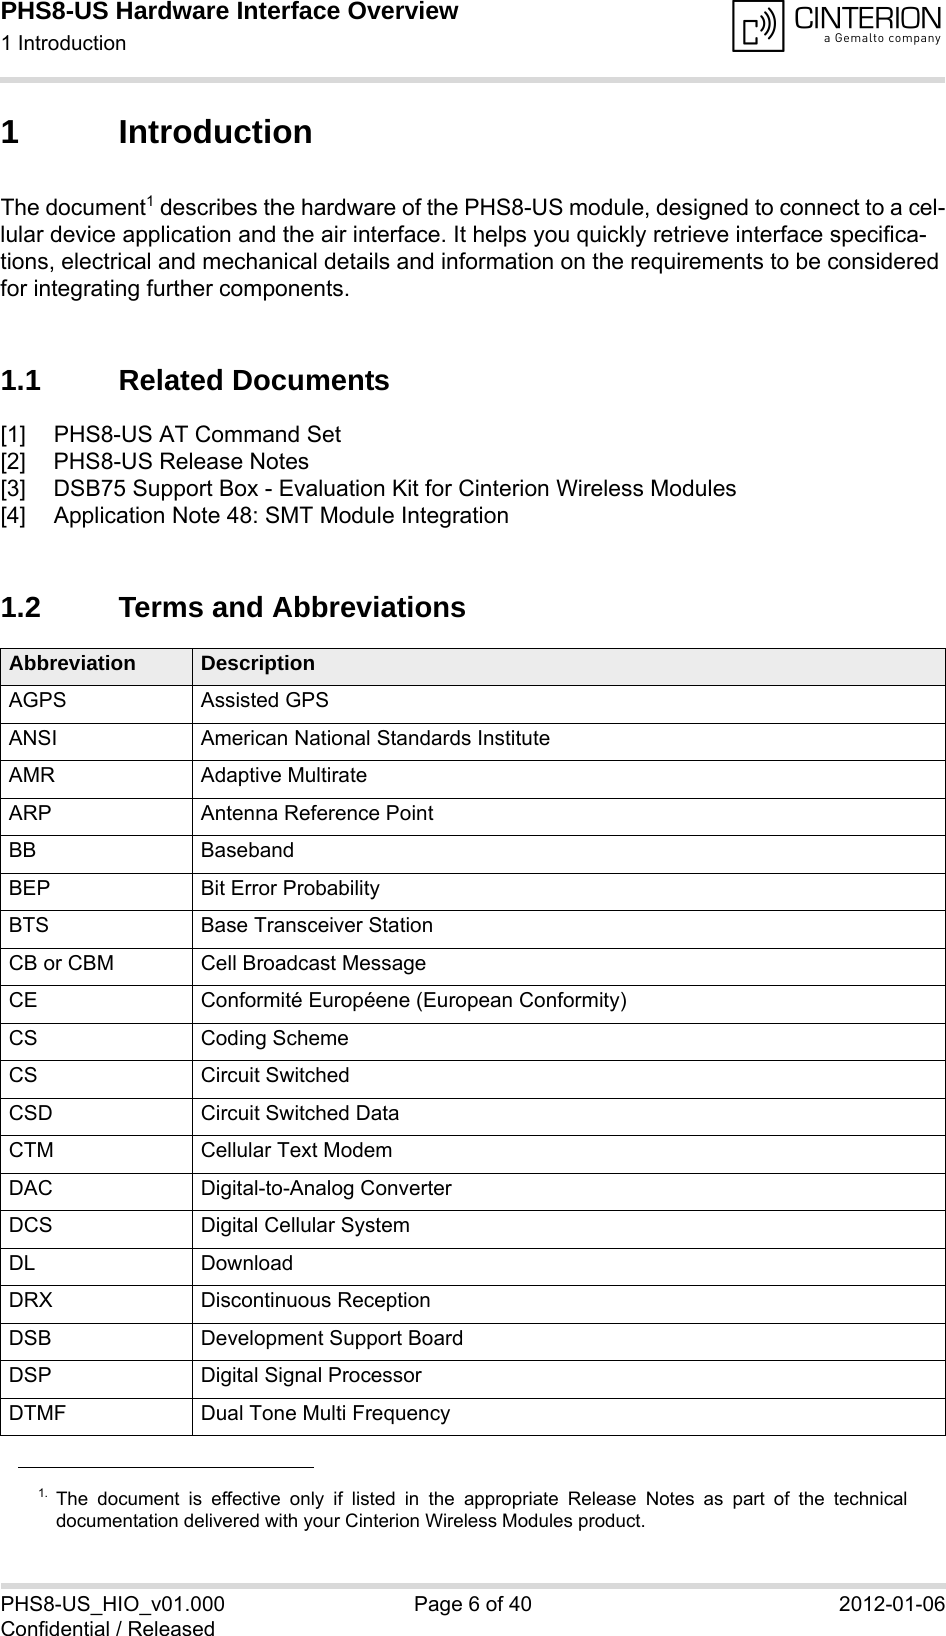 PHS8-US Hardware Interface Overview1 Introduction14PHS8-US_HIO_v01.000 Page 6 of 40 2012-01-06Confidential / Released1 IntroductionThe document1 describes the hardware of the PHS8-US module, designed to connect to a cel-lular device application and the air interface. It helps you quickly retrieve interface specifica-tions, electrical and mechanical details and information on the requirements to be considered for integrating further components.1.1 Related Documents[1] PHS8-US AT Command Set[2] PHS8-US Release Notes[3] DSB75 Support Box - Evaluation Kit for Cinterion Wireless Modules[4] Application Note 48: SMT Module Integration1.2 Terms and Abbreviations1. The document is effective only if listed in the appropriate Release Notes as part of the technicaldocumentation delivered with your Cinterion Wireless Modules product.Abbreviation DescriptionAGPS Assisted GPSANSI American National Standards InstituteAMR Adaptive MultirateARP Antenna Reference PointBB BasebandBEP Bit Error ProbabilityBTS Base Transceiver StationCB or CBM Cell Broadcast MessageCE Conformité Européene (European Conformity)CS Coding SchemeCS Circuit SwitchedCSD Circuit Switched DataCTM Cellular Text ModemDAC Digital-to-Analog ConverterDCS Digital Cellular SystemDL DownloadDRX Discontinuous ReceptionDSB Development Support BoardDSP Digital Signal ProcessorDTMF Dual Tone Multi Frequency